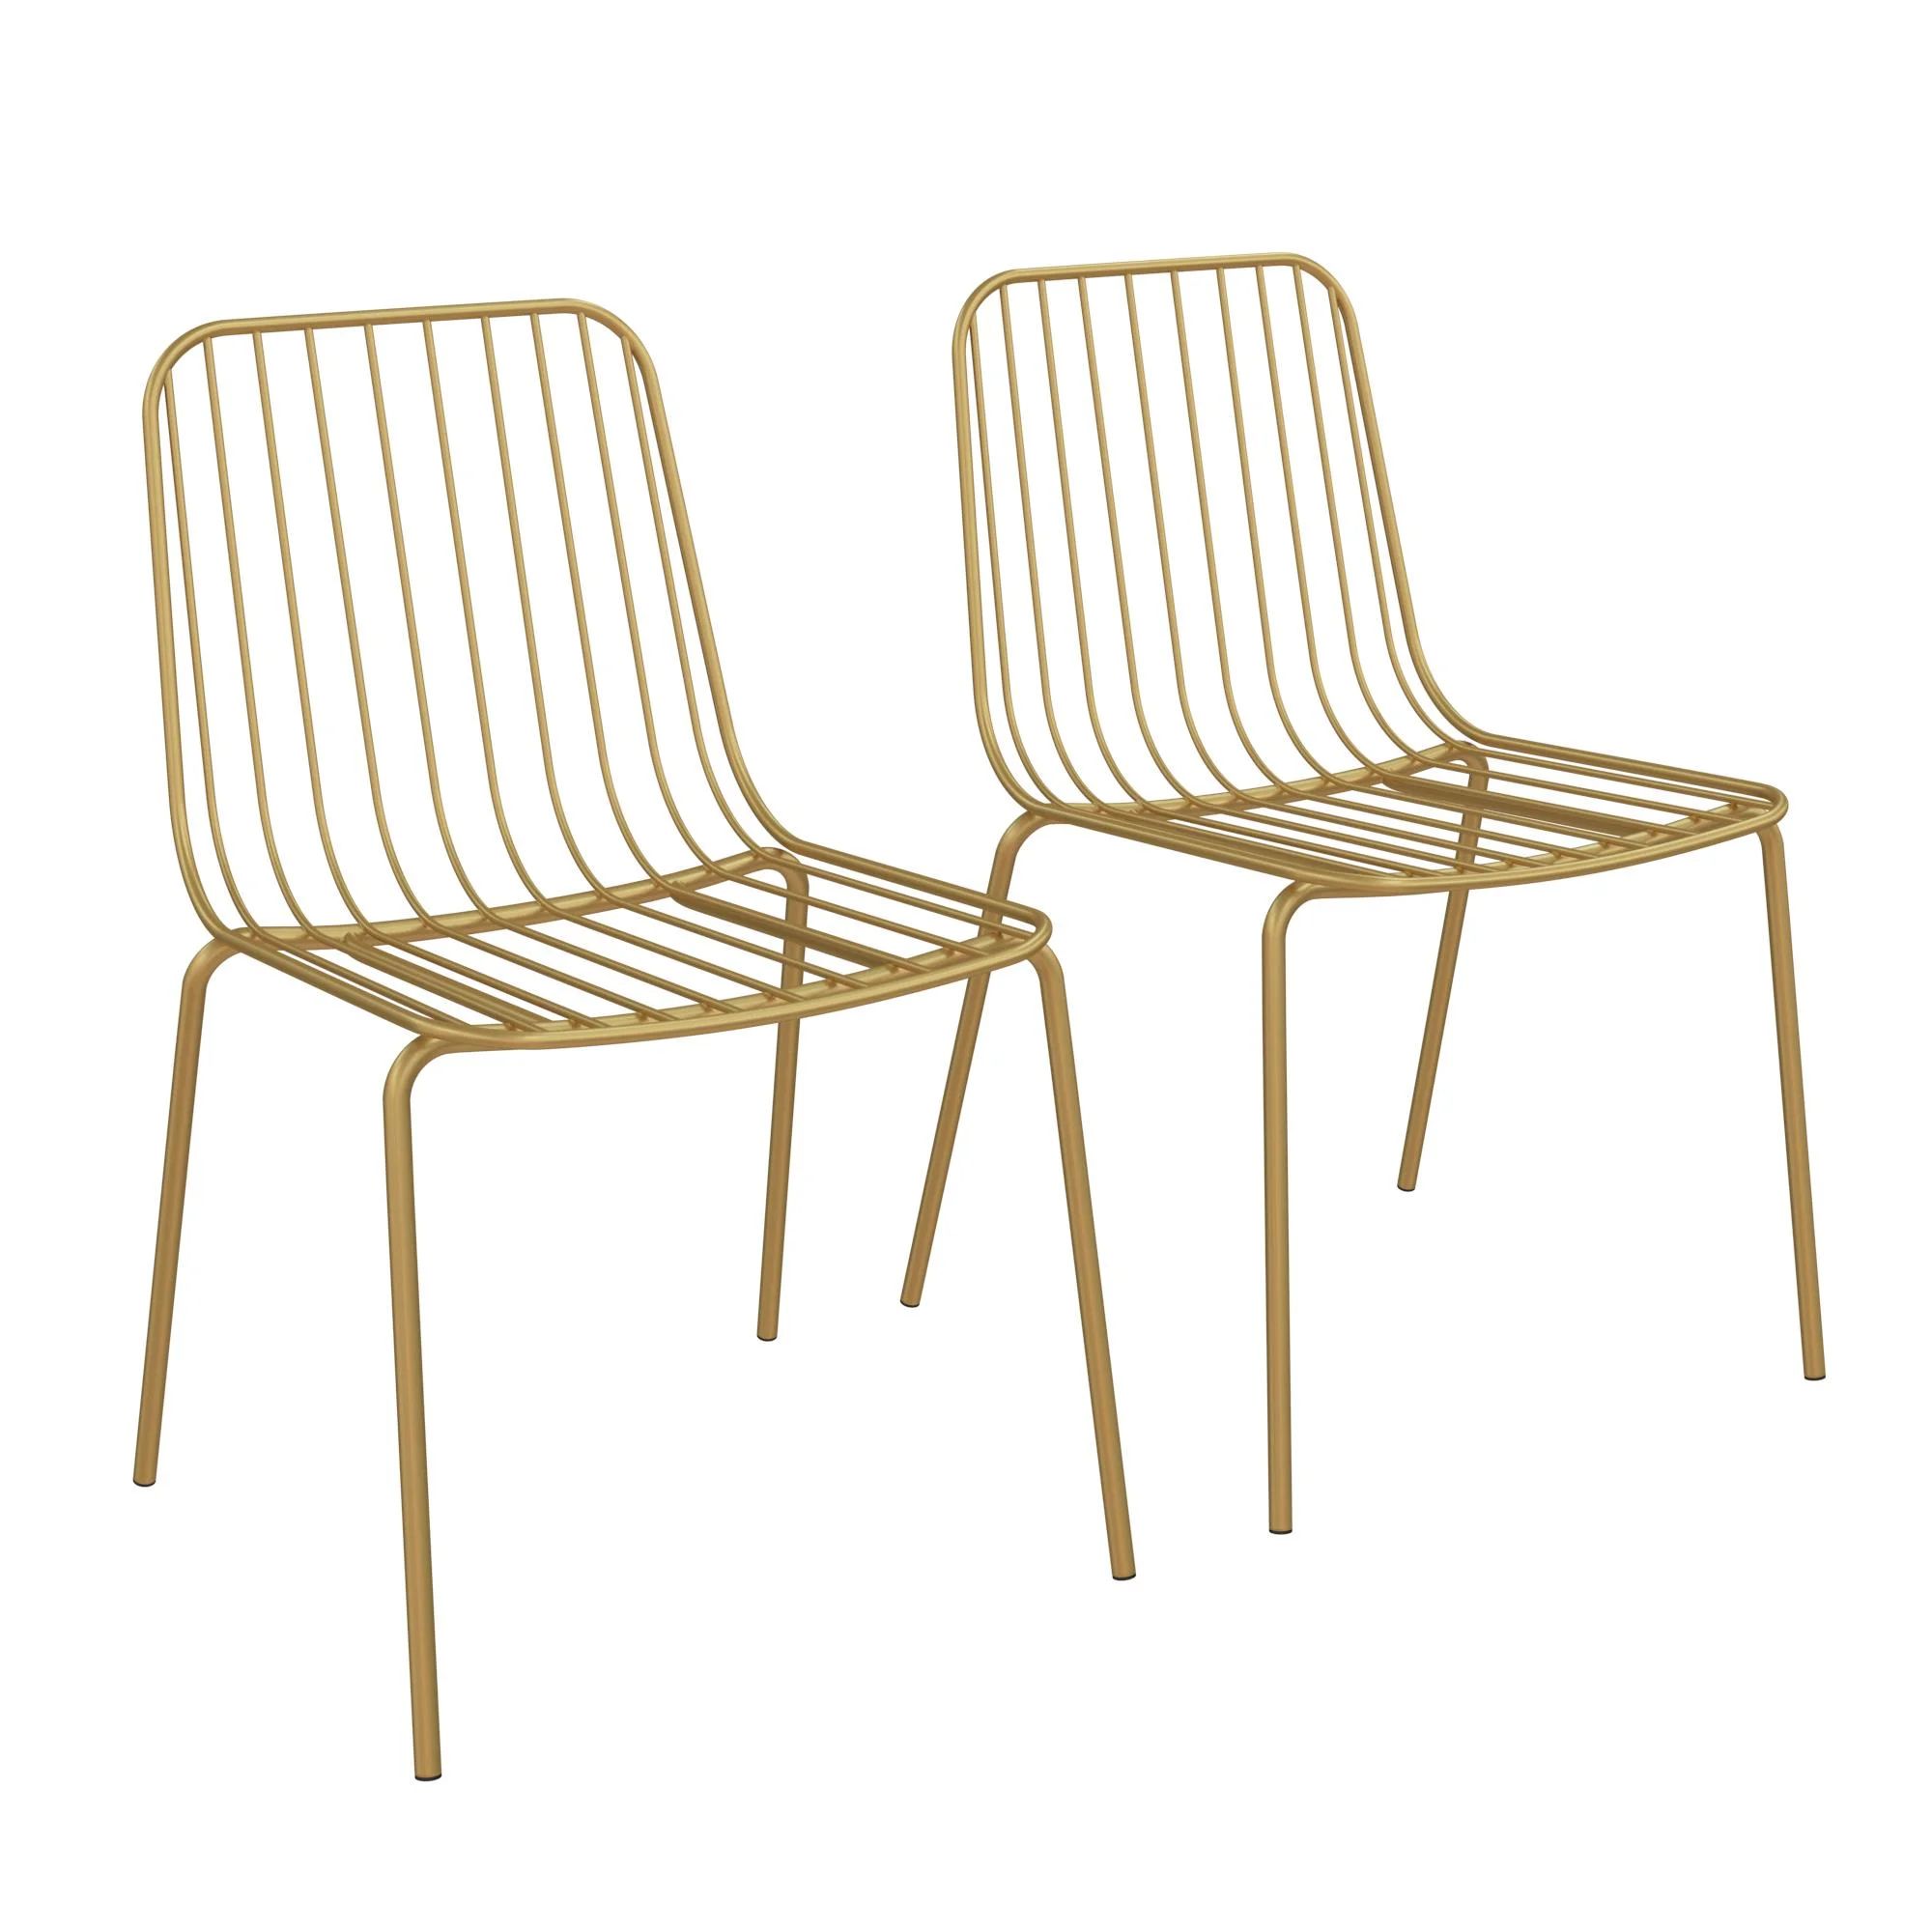 DHP Caden Wire Dining Chair, Set of 2, Gold Metal | Walmart (US)